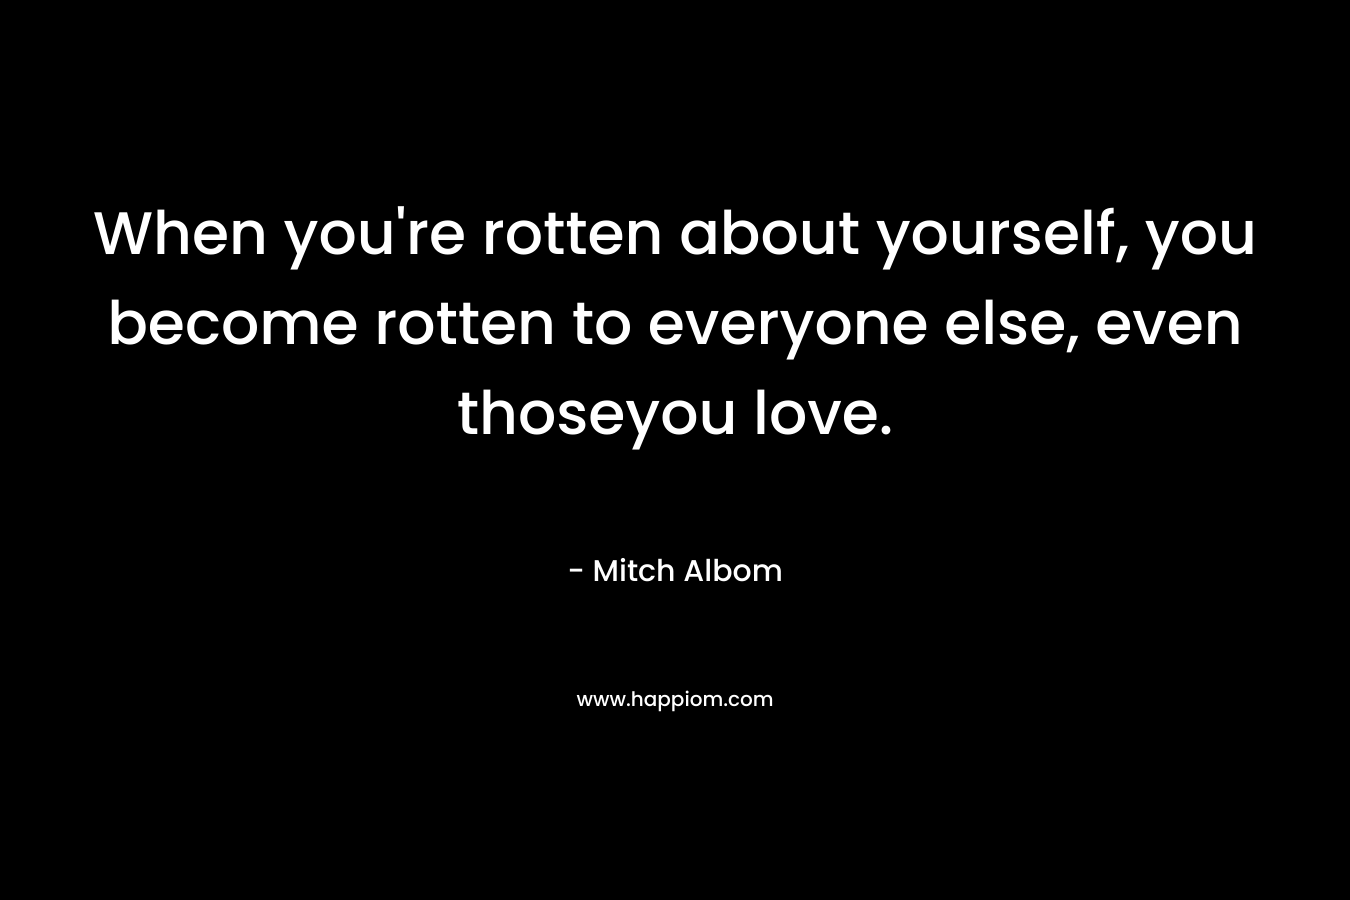 When you're rotten about yourself, you become rotten to everyone else, even thoseyou love.